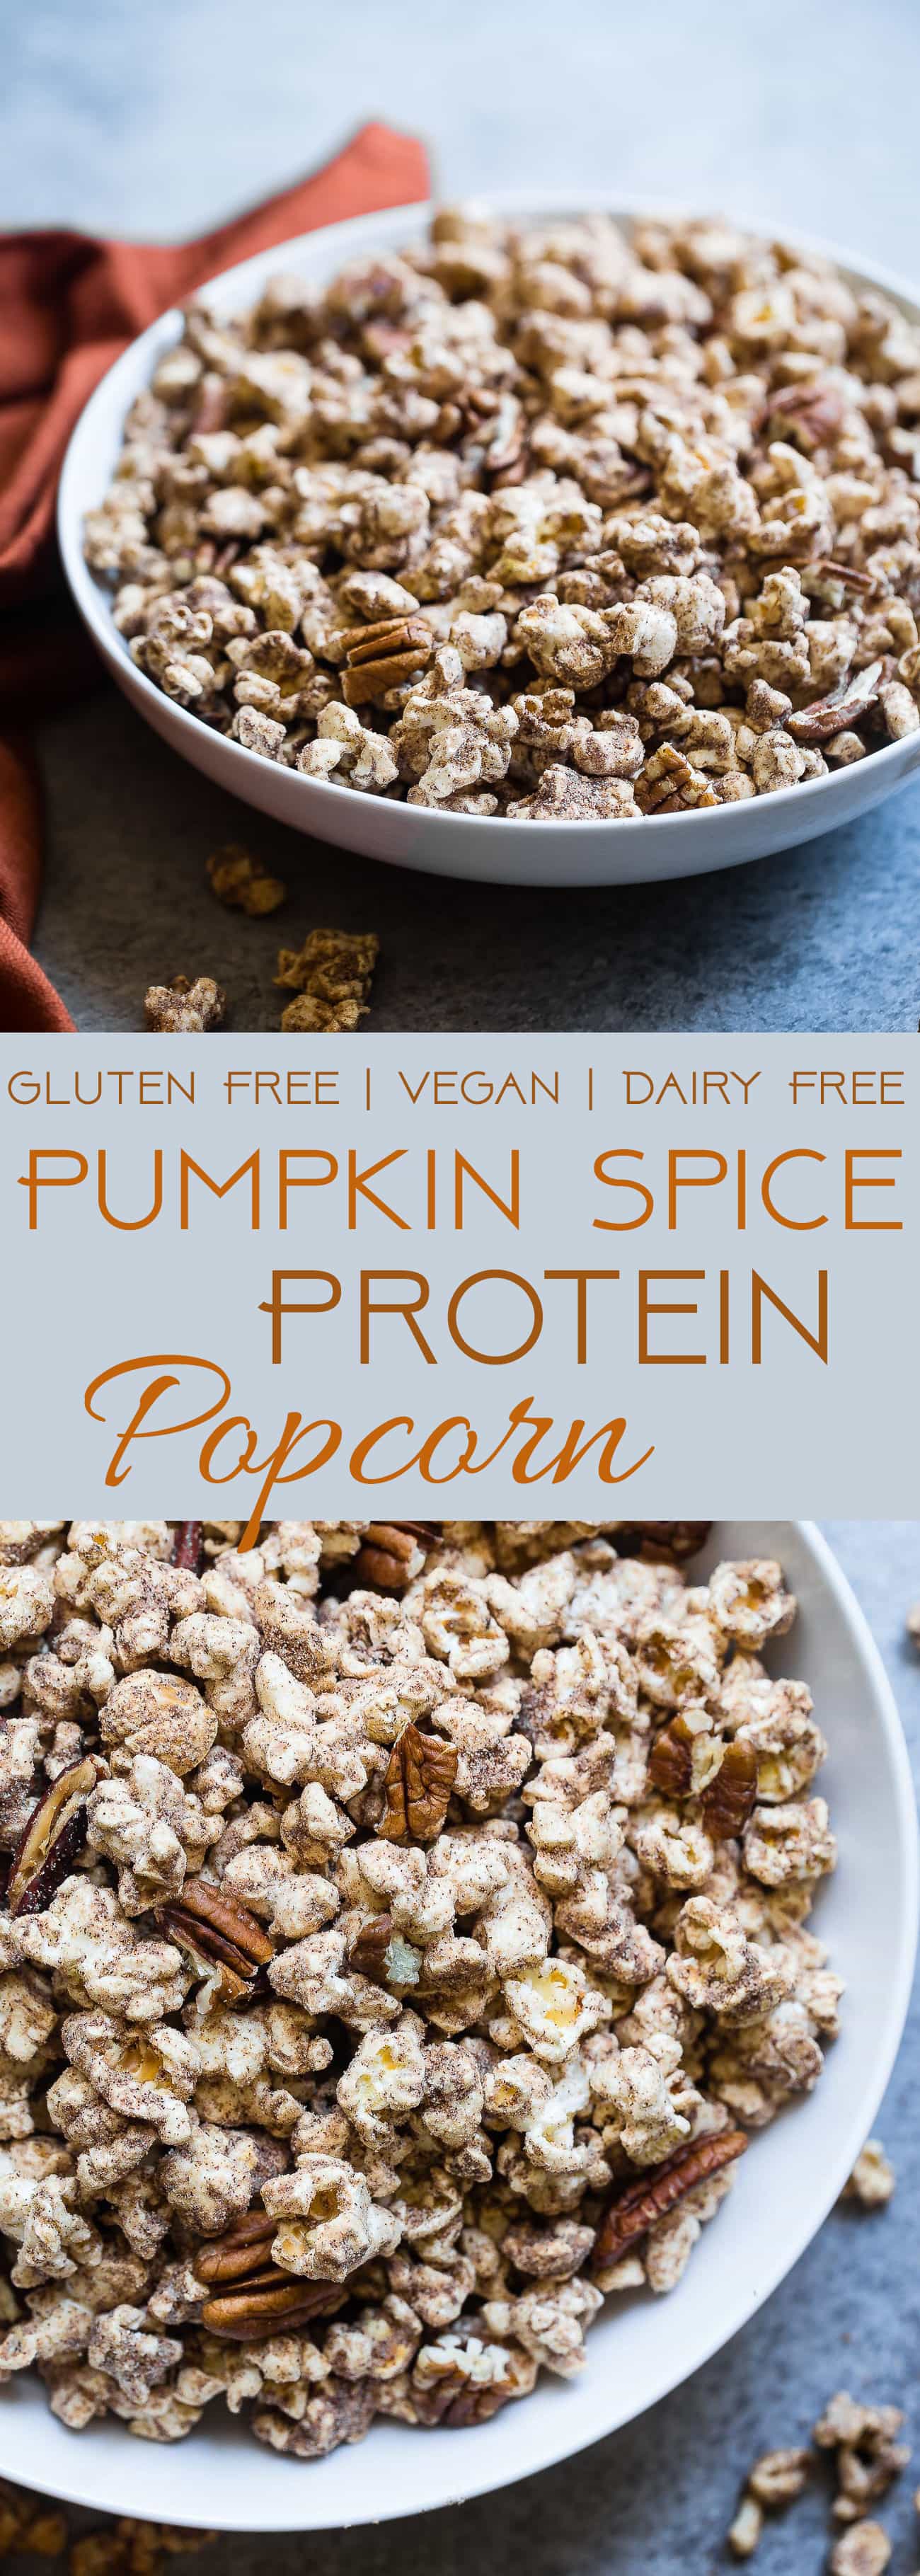  Vegan Pumpkin Spice Protein Popcorn -  This Pumpkin Flavored Homemade Microwave Popcorn is a healthy, dairy-free and protein packed fall treat! Perfect for kids and adults and so easy to make! | Foodfaithfitness.com | @FoodFaithFit | pumpkin popcorn recipes. healthy pumpkin popcorn. movie night snacks for kids. fall snacks. fall snacks for kids. vegan popcorn. popcorn recipes. snack ideas for kids. vegan snack ideas. healthy snack ideas.